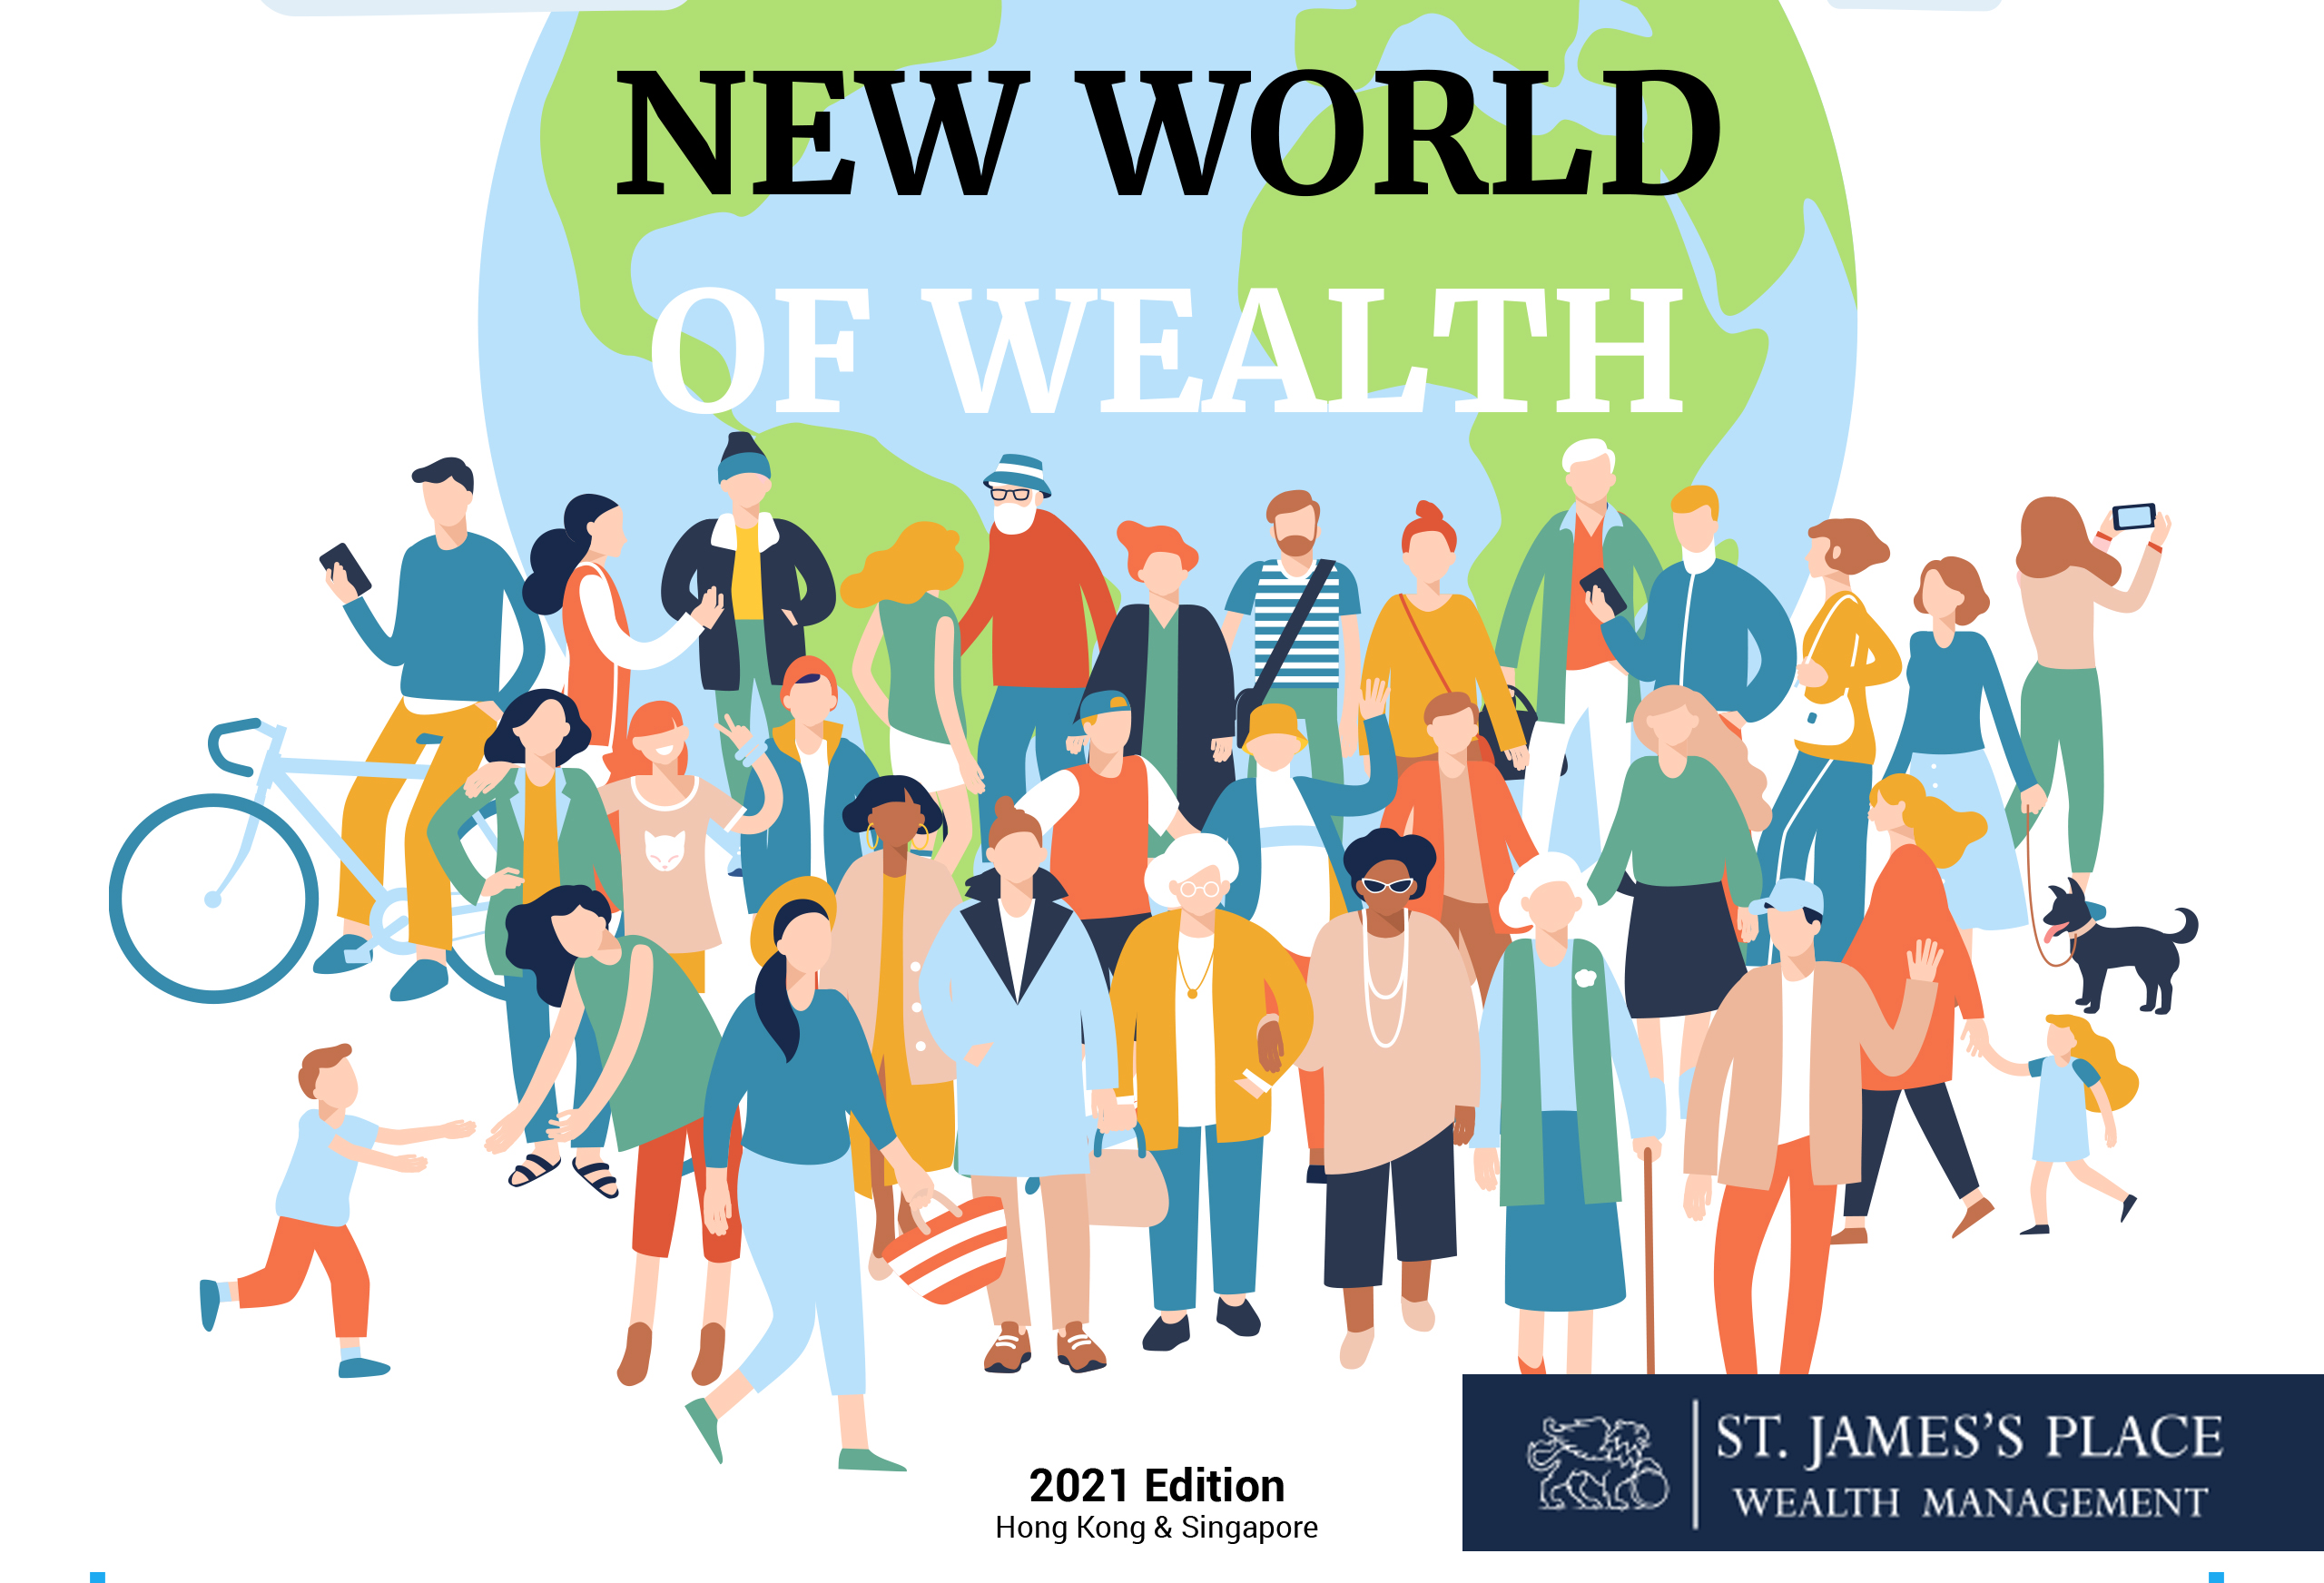 St. James’s Place The New World of Wealth Report 2021